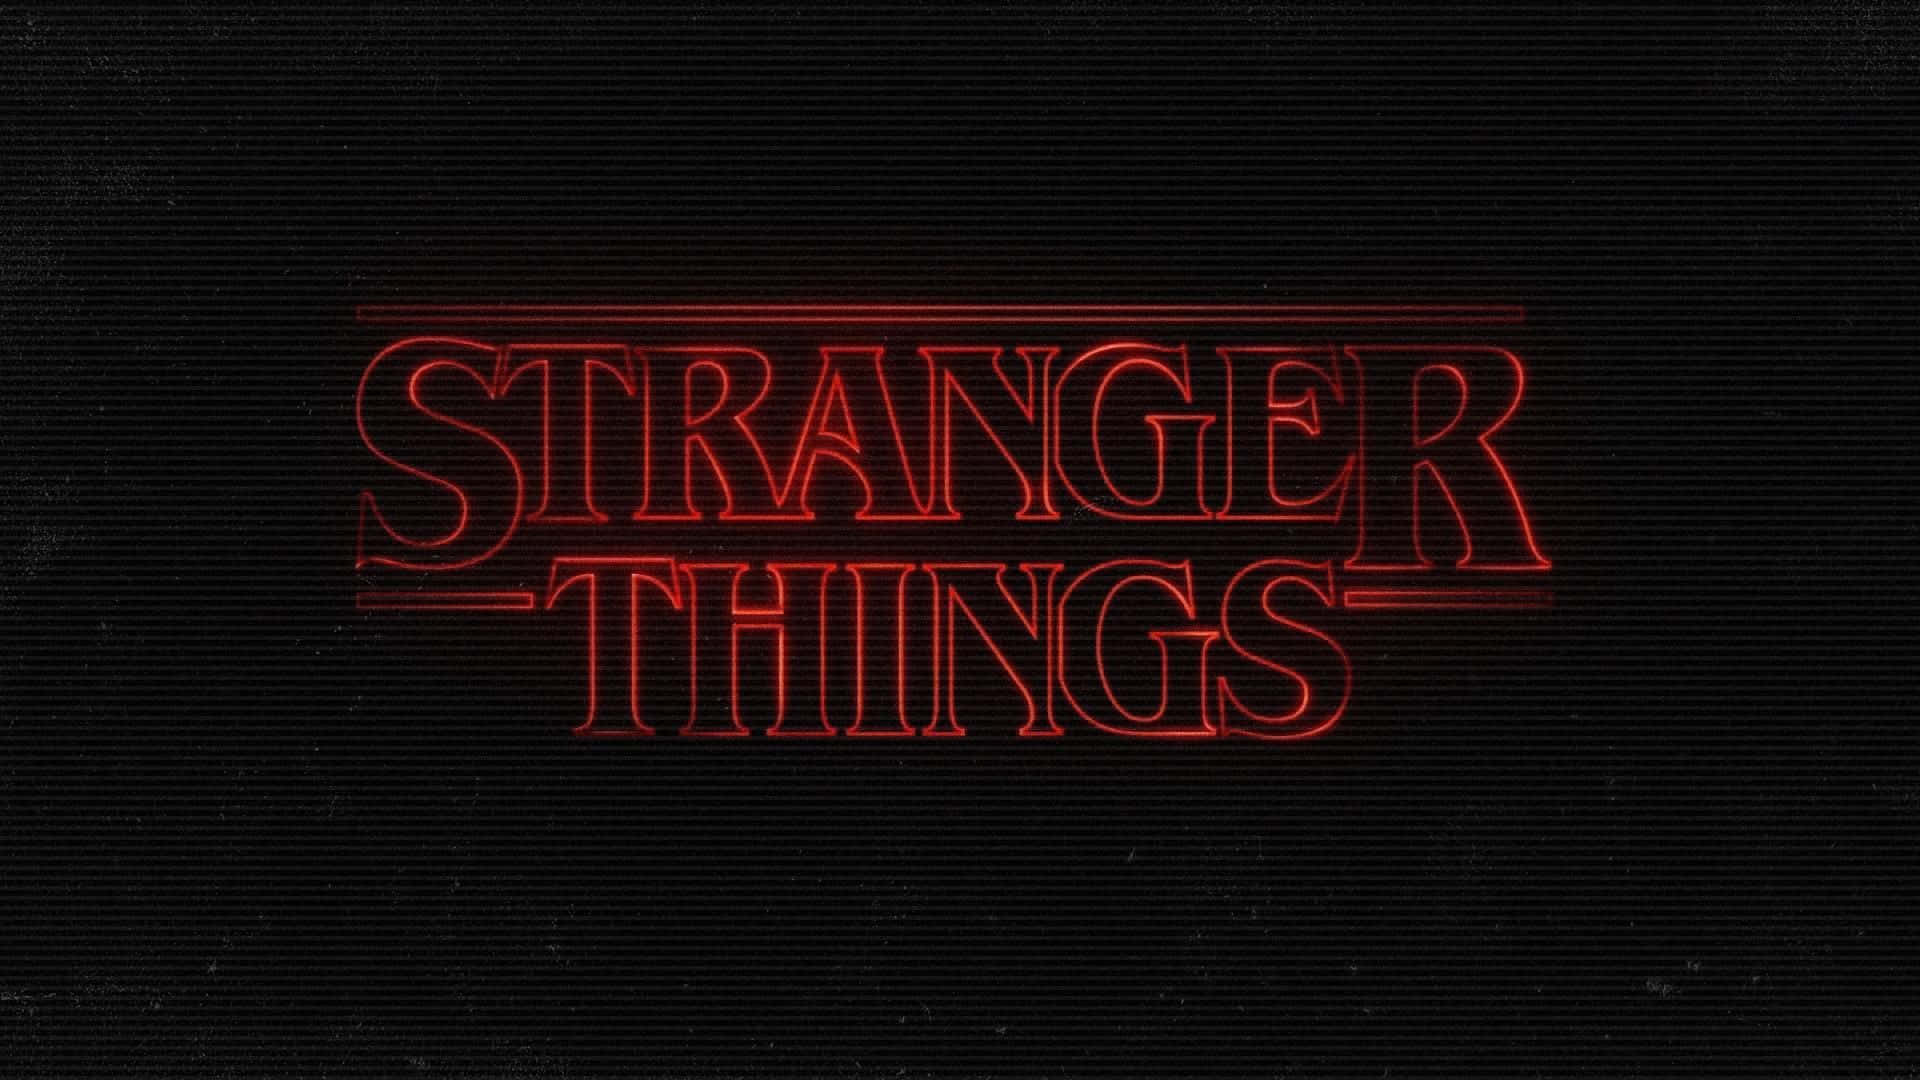 Experience the mysterious 80's vibe with this Stranger Things aesthetic desktop background. Wallpaper